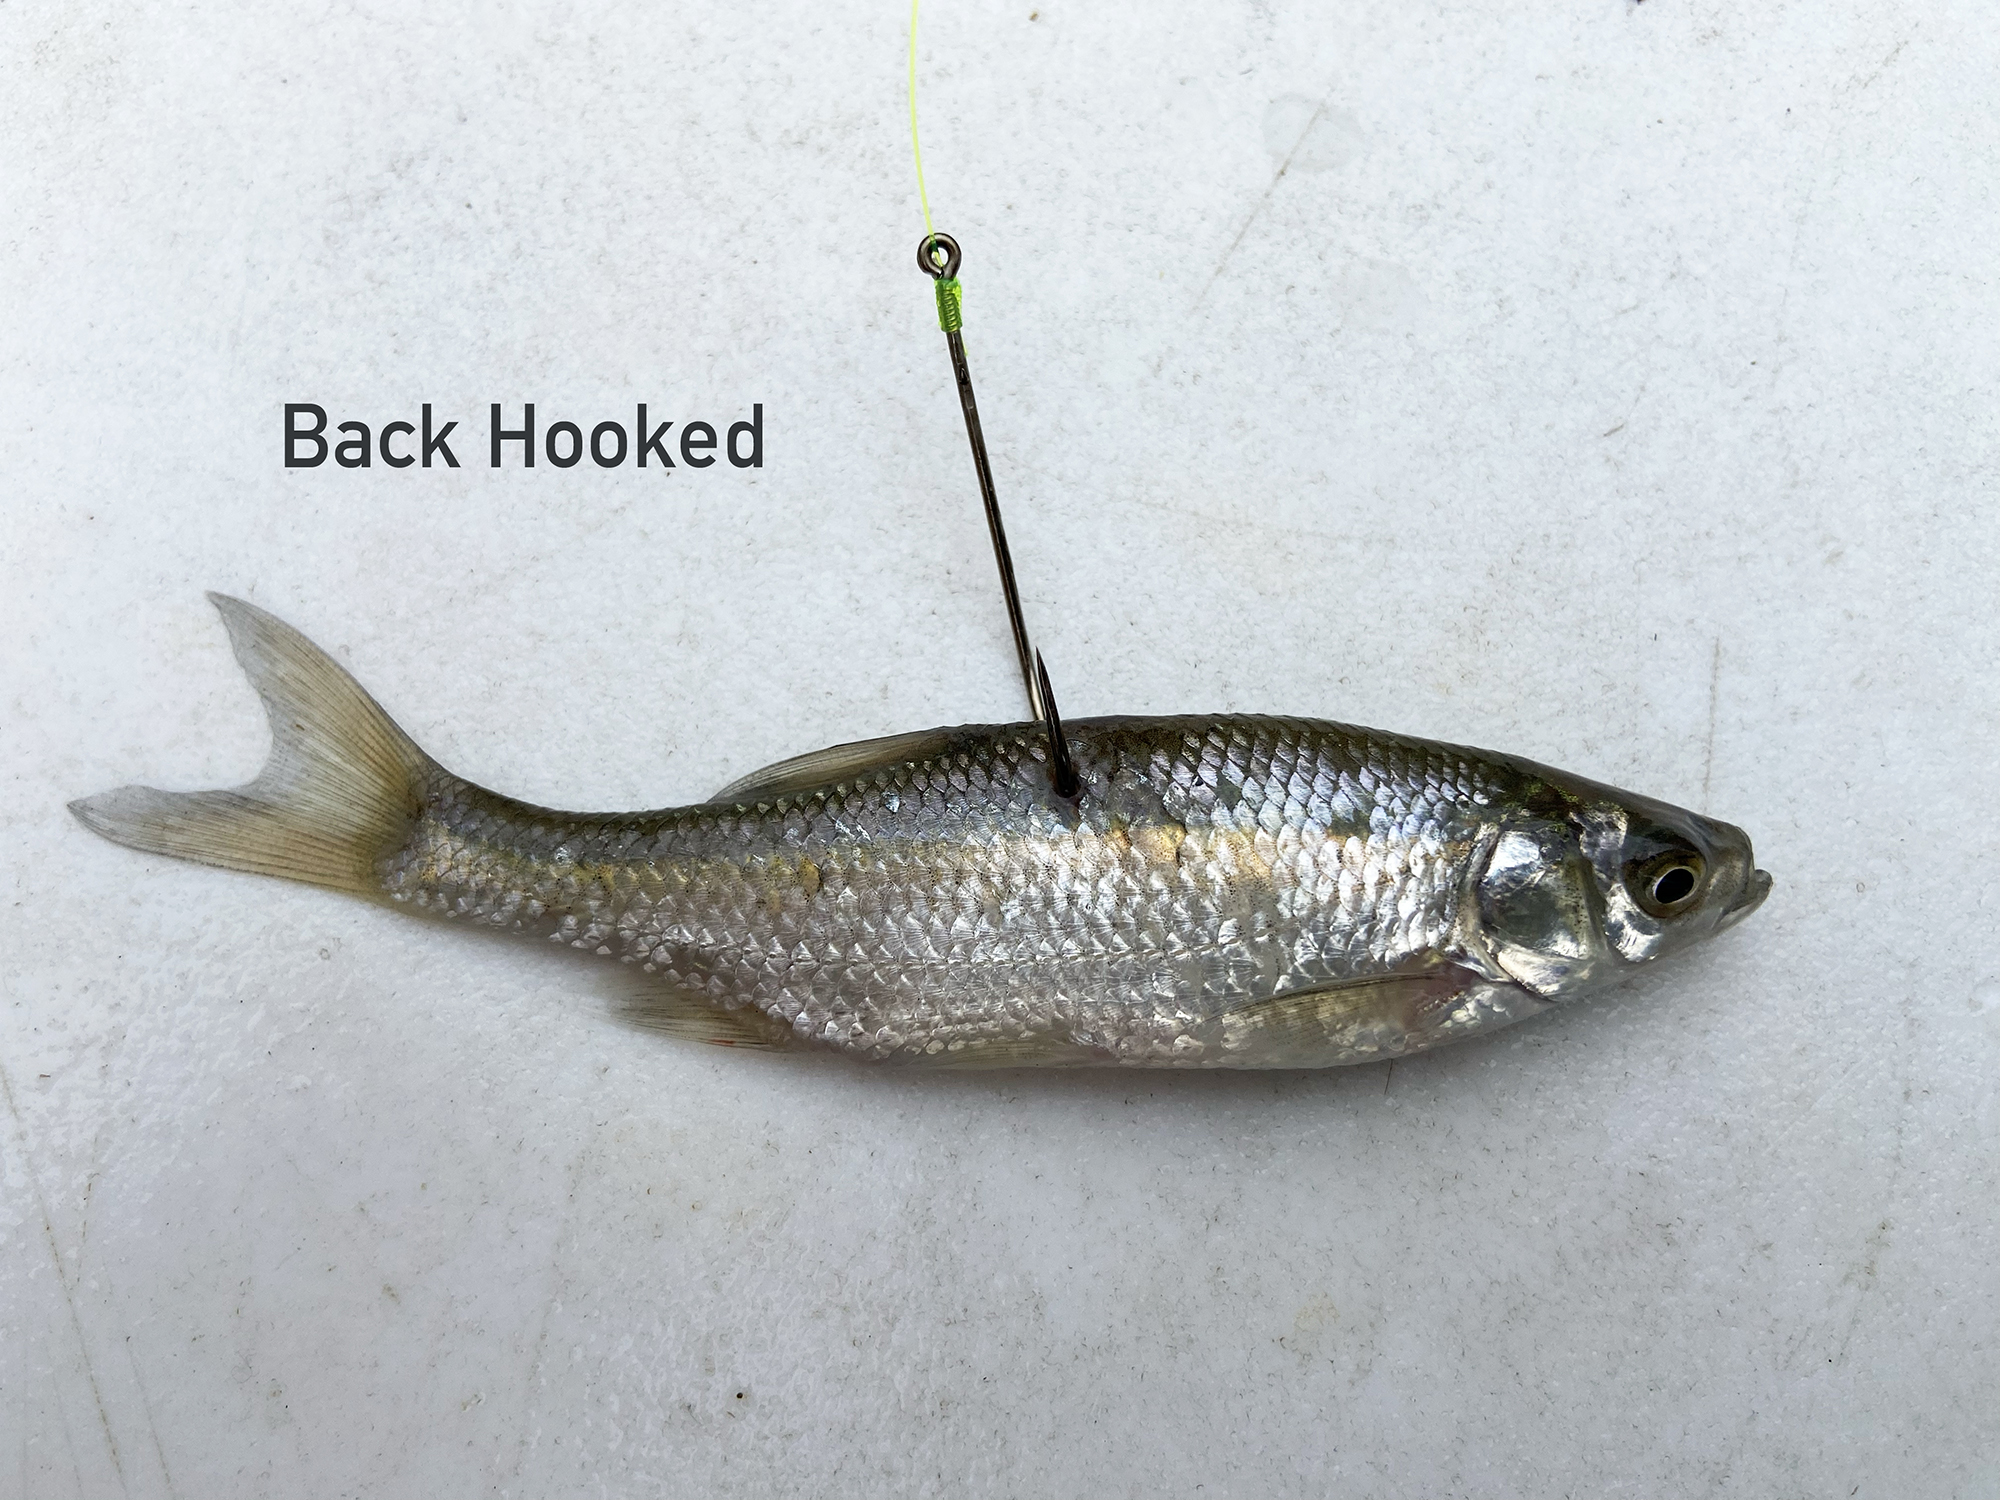 How to Hook a Shiner